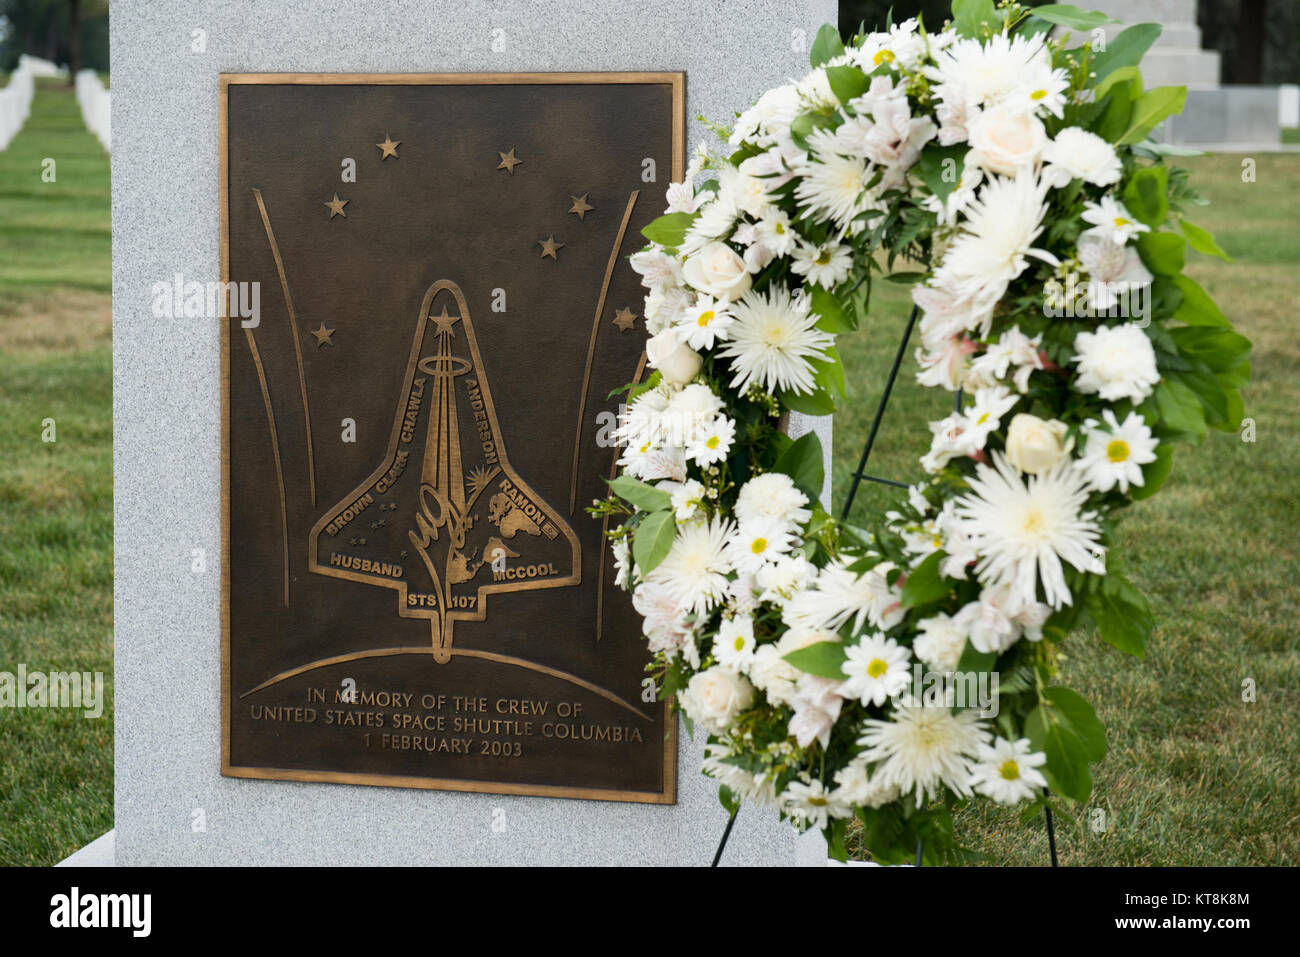 A wreath laid by Chief Minister of Haryana, India Manohar Lal Khattar rests next to the Space Shuttle Columbia Memorial near the Memorial Amphitheater in Arlington National Cemetery, Aug. 18, 2015, in Arlington, Va. Kalpana Chawla, one of seven crew members killed during the Columbia disaster. She was born in Karnal, India, and was posthumously awarded the Congressional Space Medal of Honor, the NASA Space Flight Medal, and the NASA Distinguished Service Medal. (U.S. Army photo by Rachel Larue/released) Stock Photo